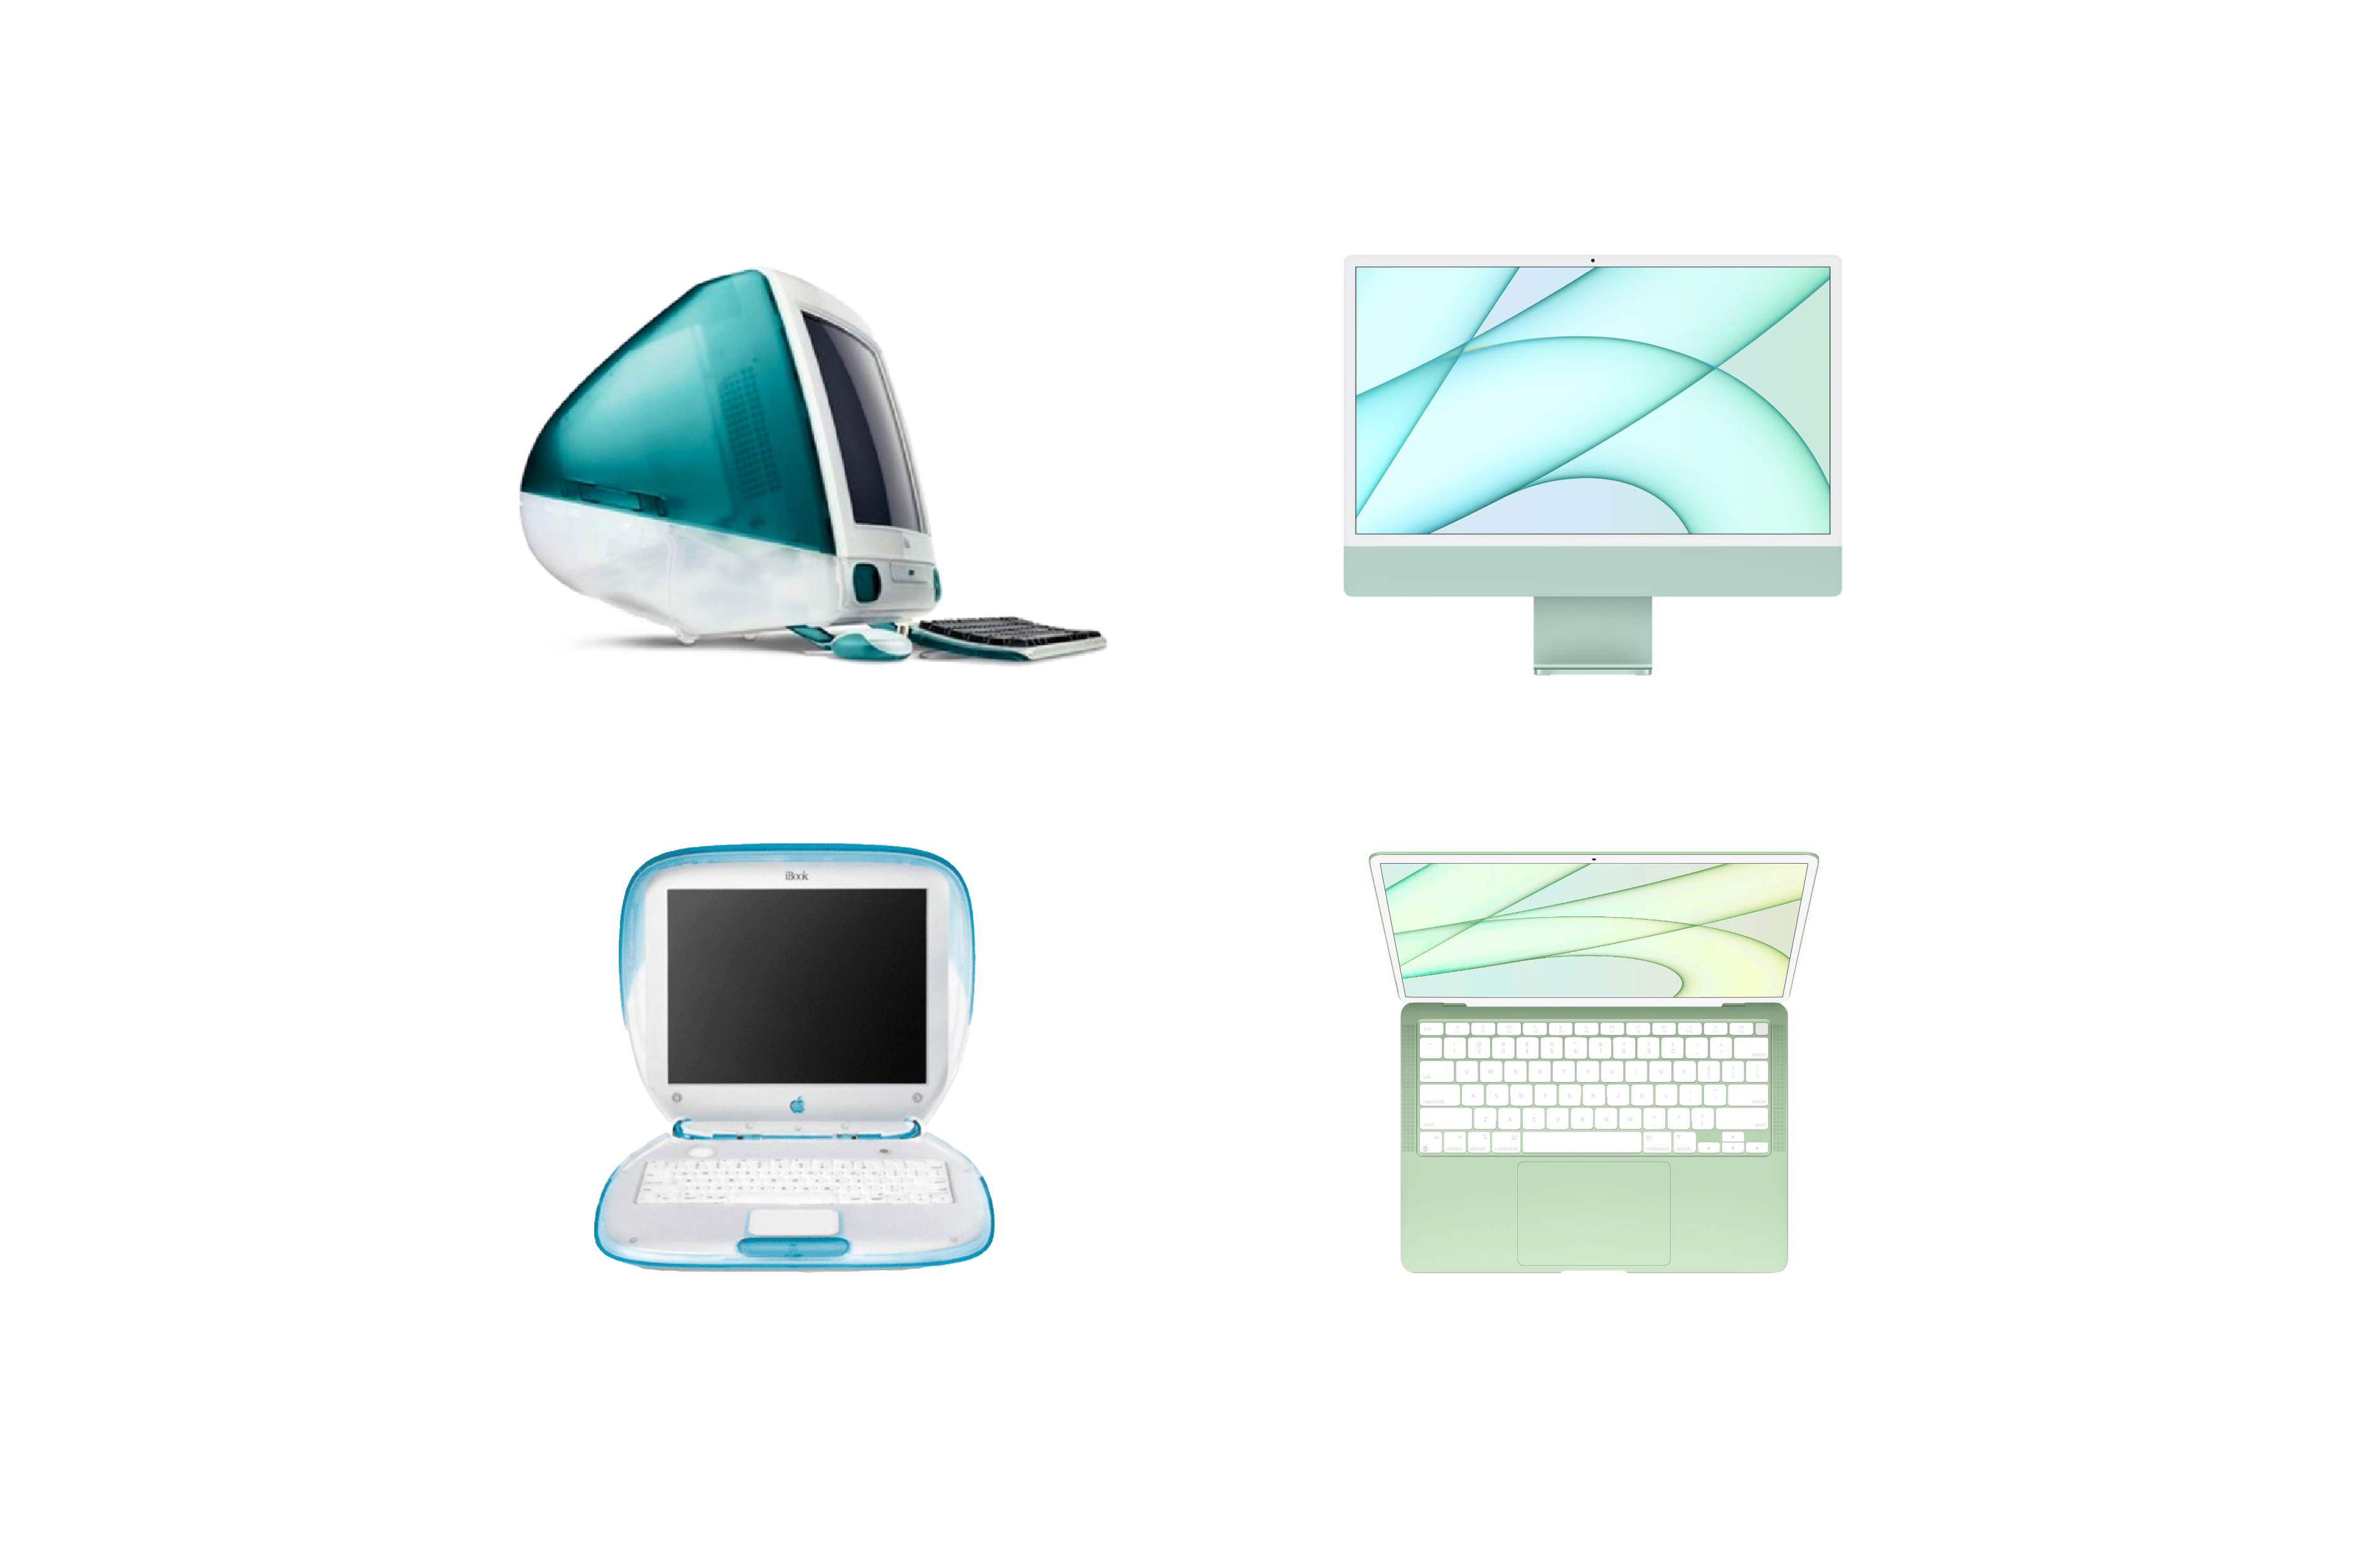 what is the best browser for imac g3